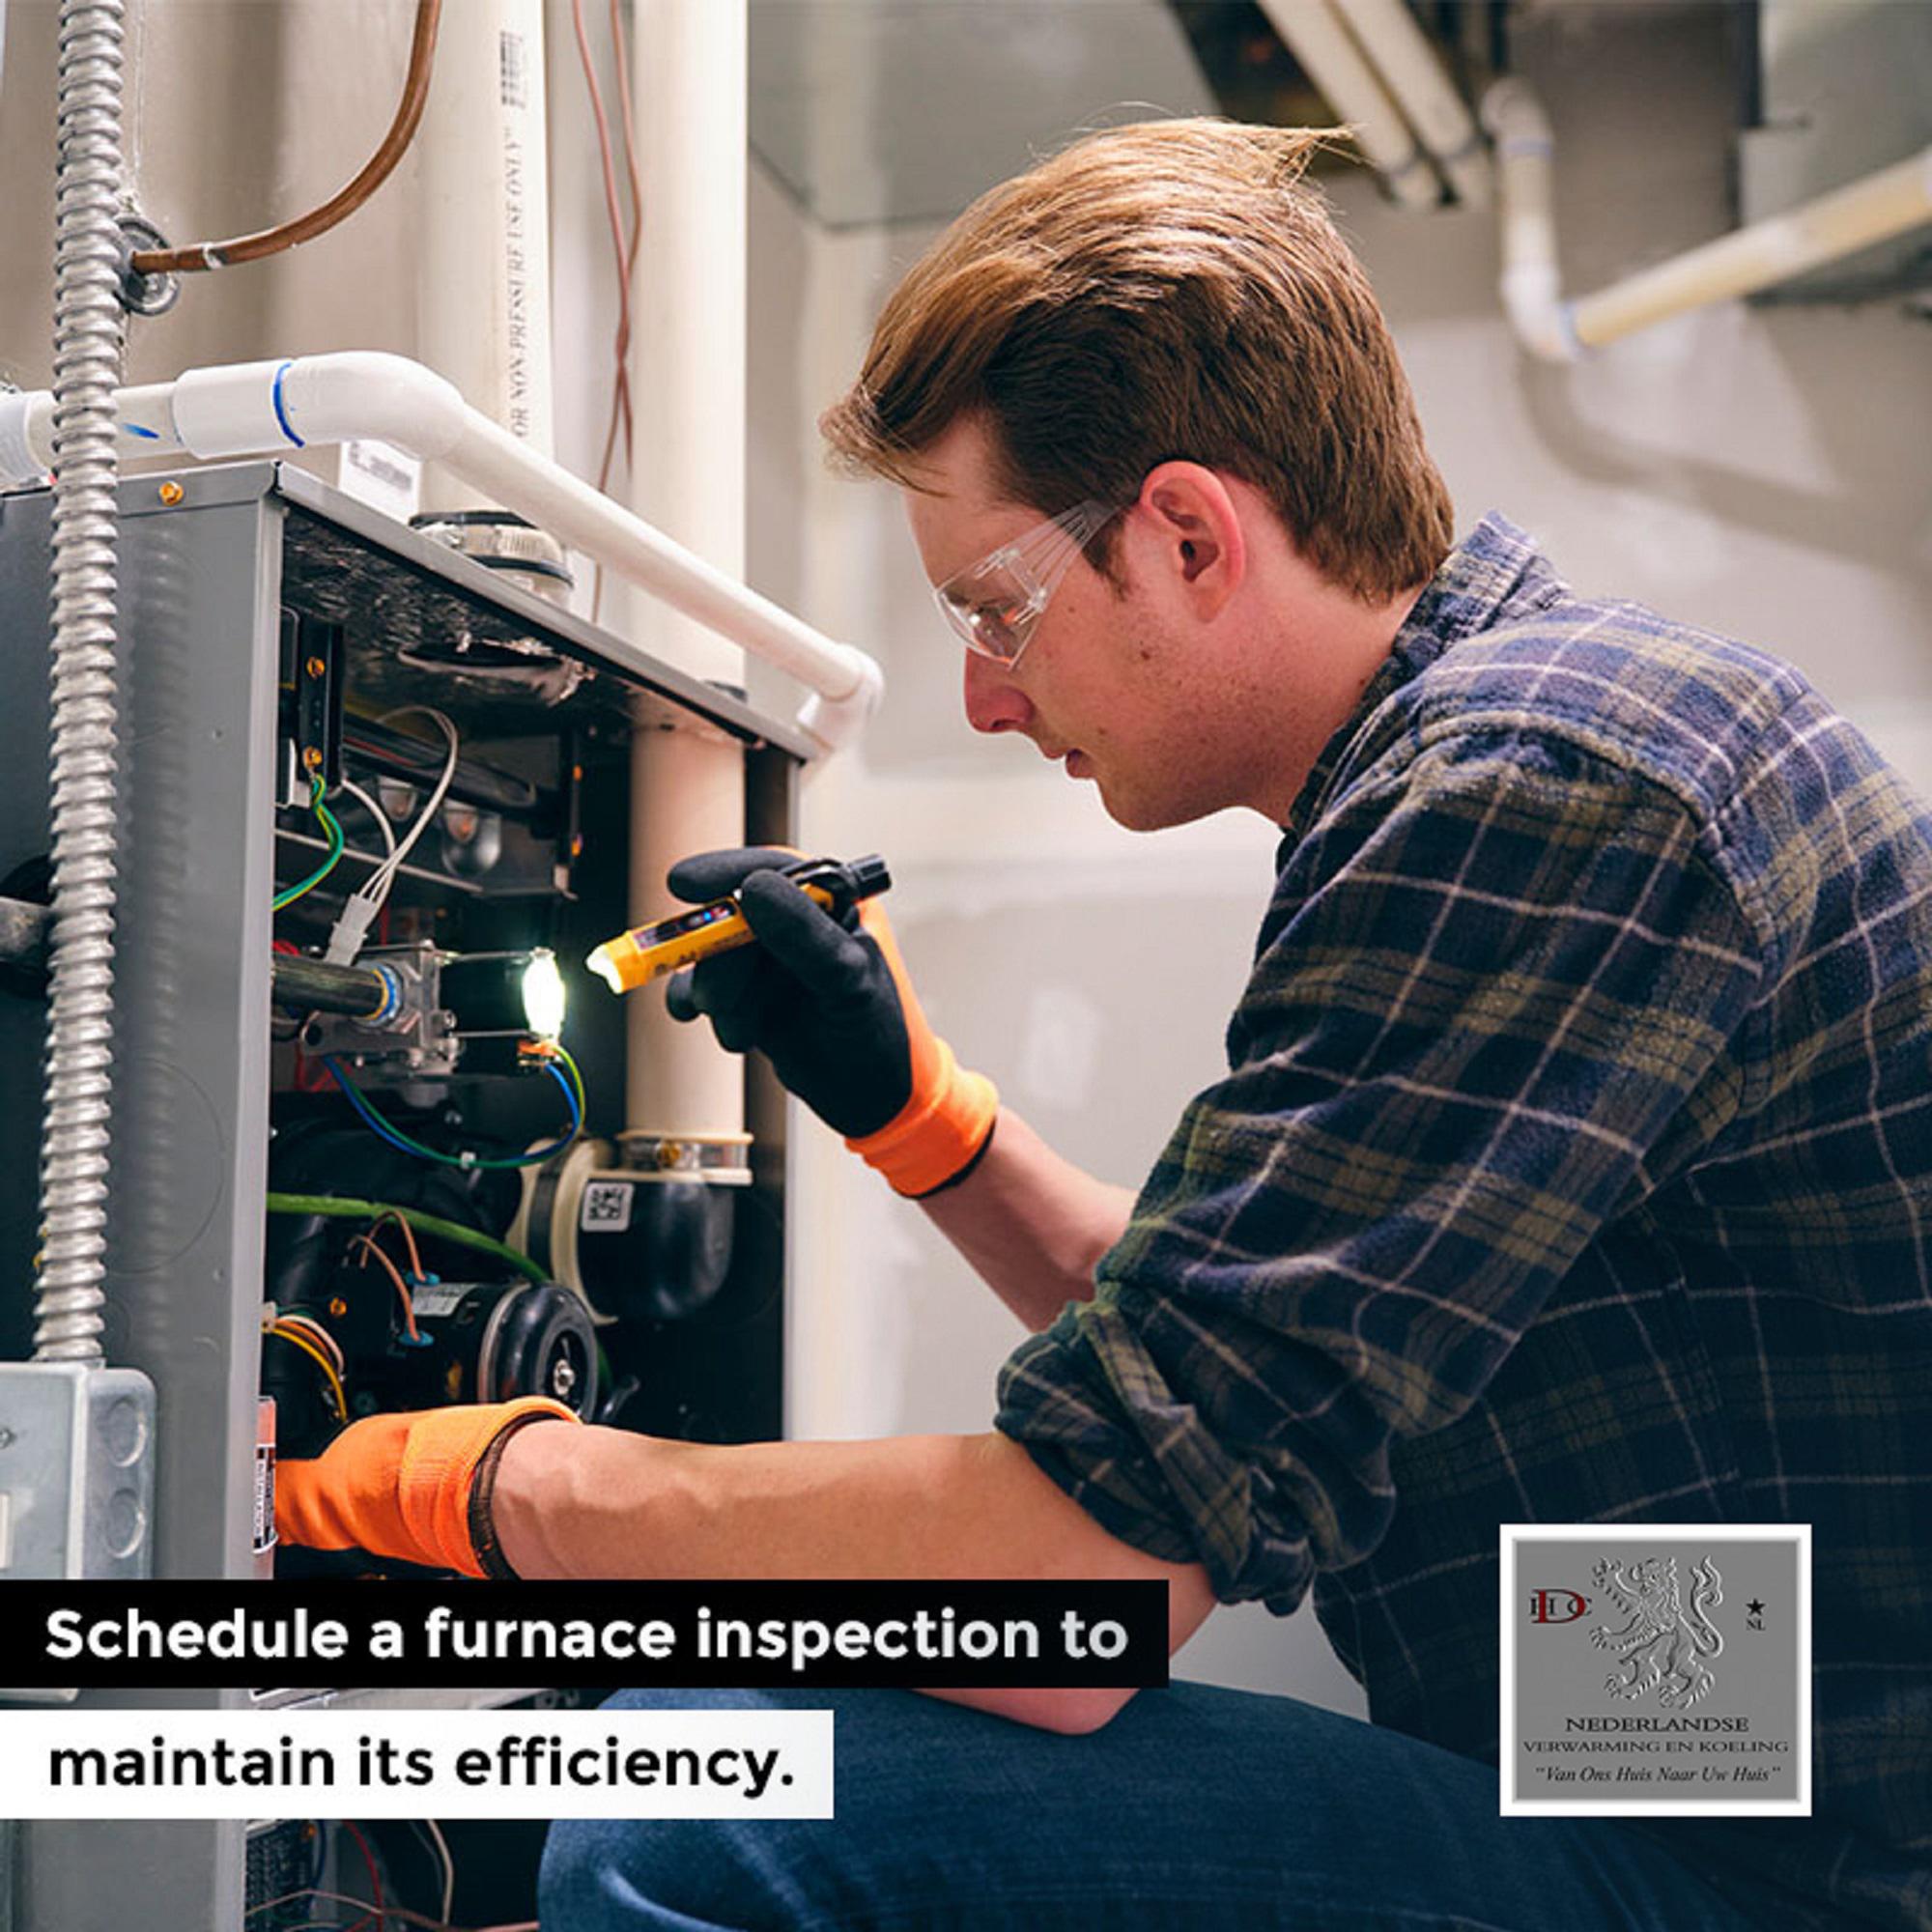 Do you want to enhance the performance of your furnace? Call us now to schedule a furnace inspection! Our HVAC specialists will take a look at your unit and identify how to increase its efficiency.